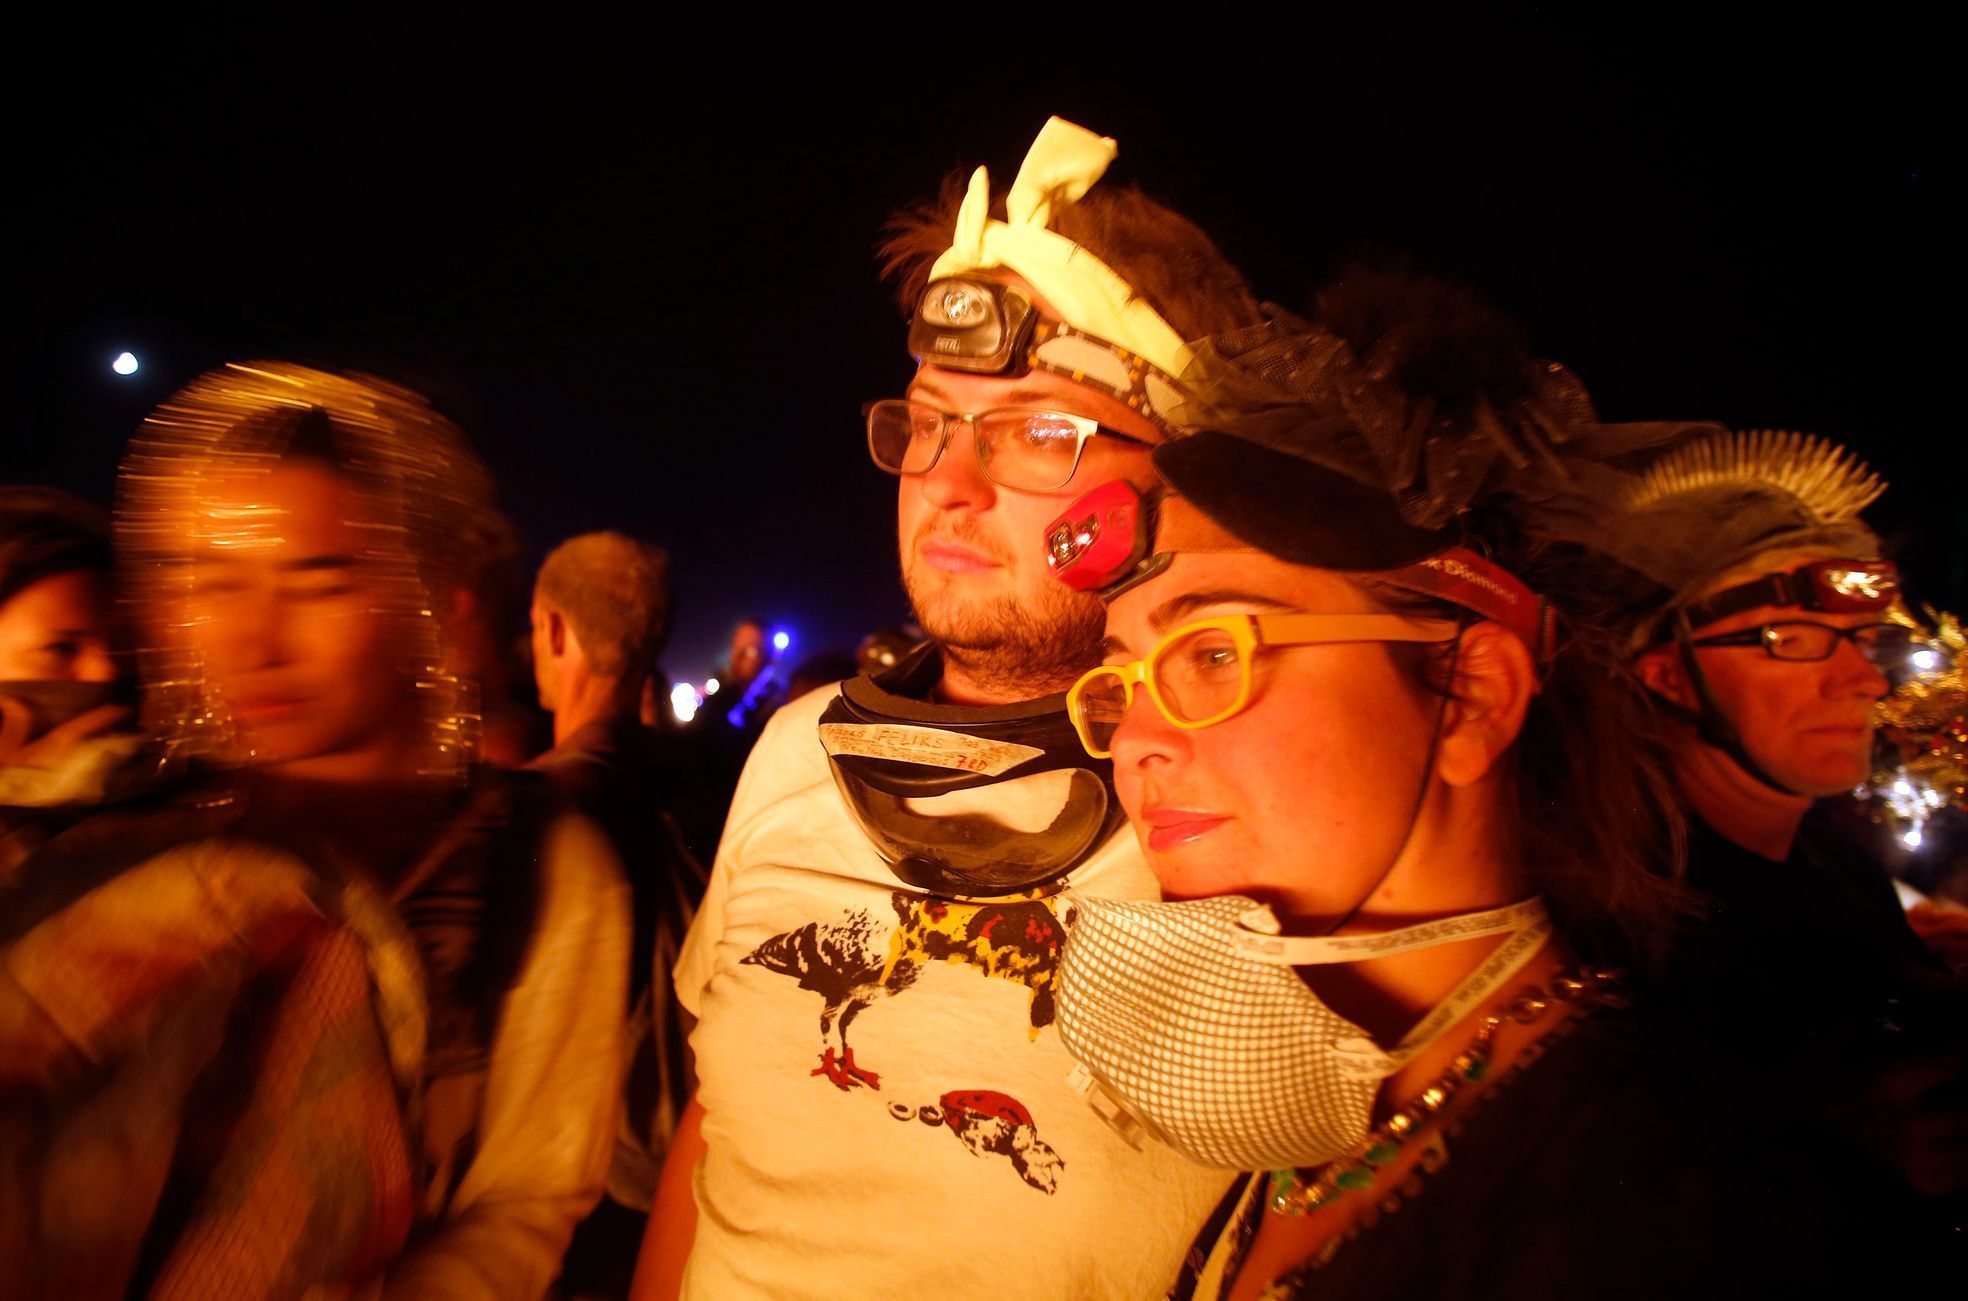 Zev Stone, left, and Nina Tasp watch as the Temple of Grace burns on the last day of the Burning Man 2014 &quot;Caravansary&quot; arts and music festival in the Black Rock Desert of Nevada